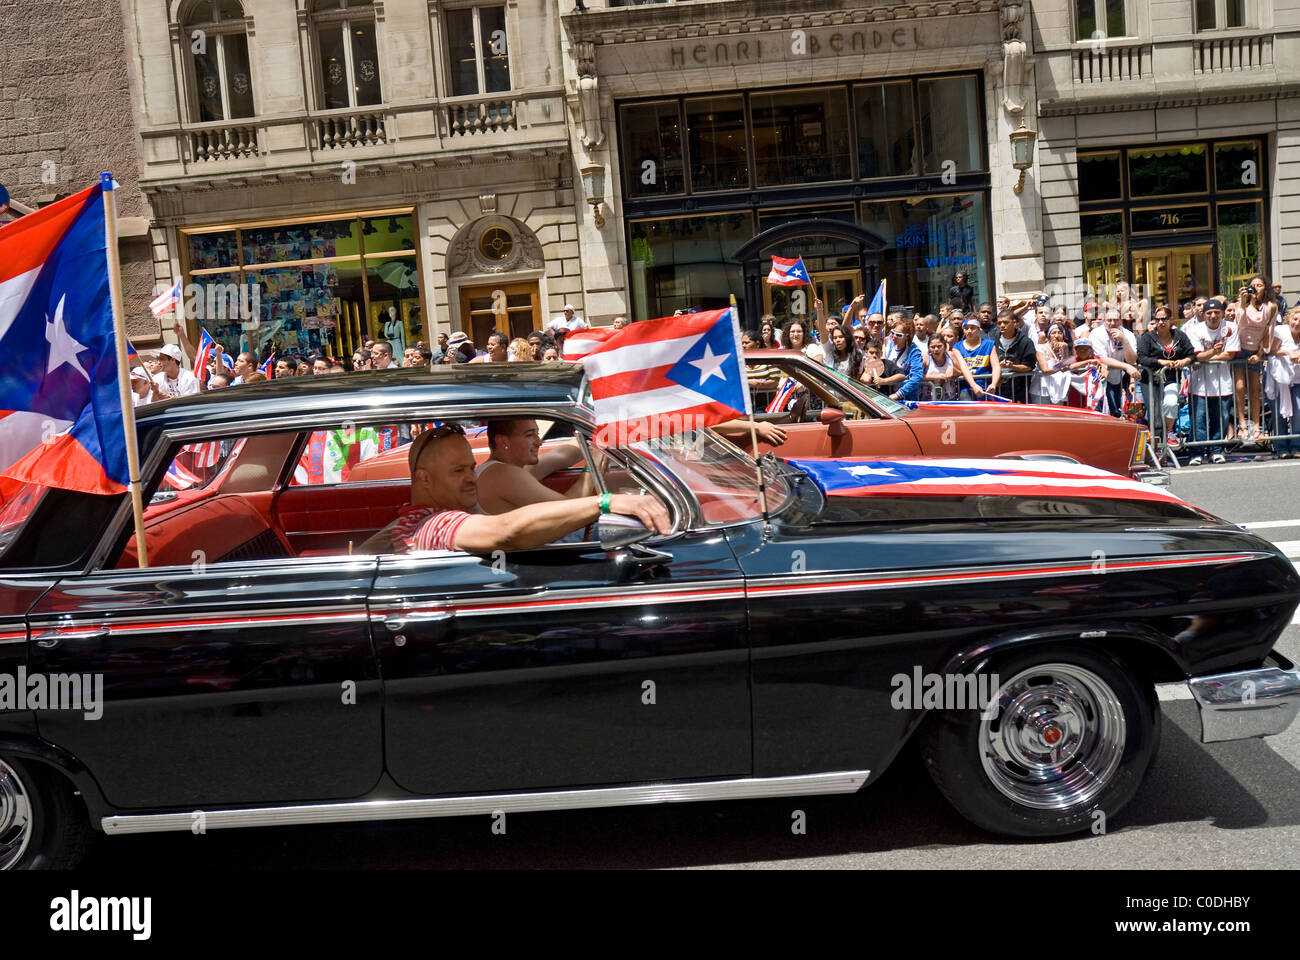 The Puerto Rican Day Parade on Fifth Avenue, New York City, June 2009. Stock Photo